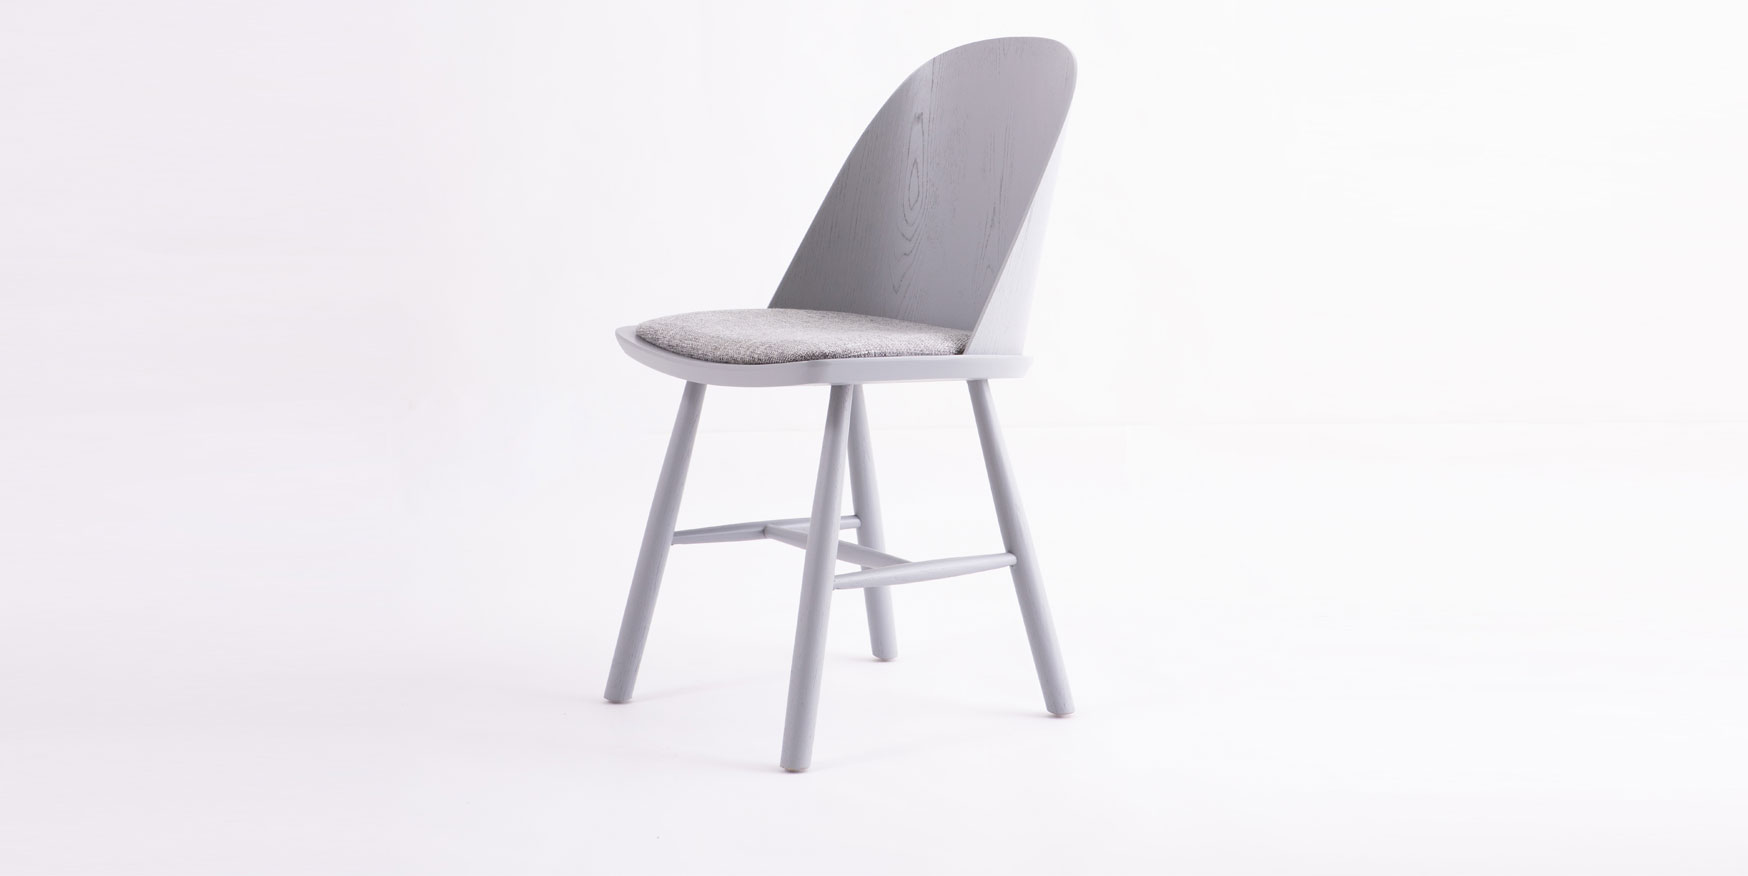 C17 Dining Chair Modern Nordic Wooden Shell Chair Plywood Chair Bentwood Chair